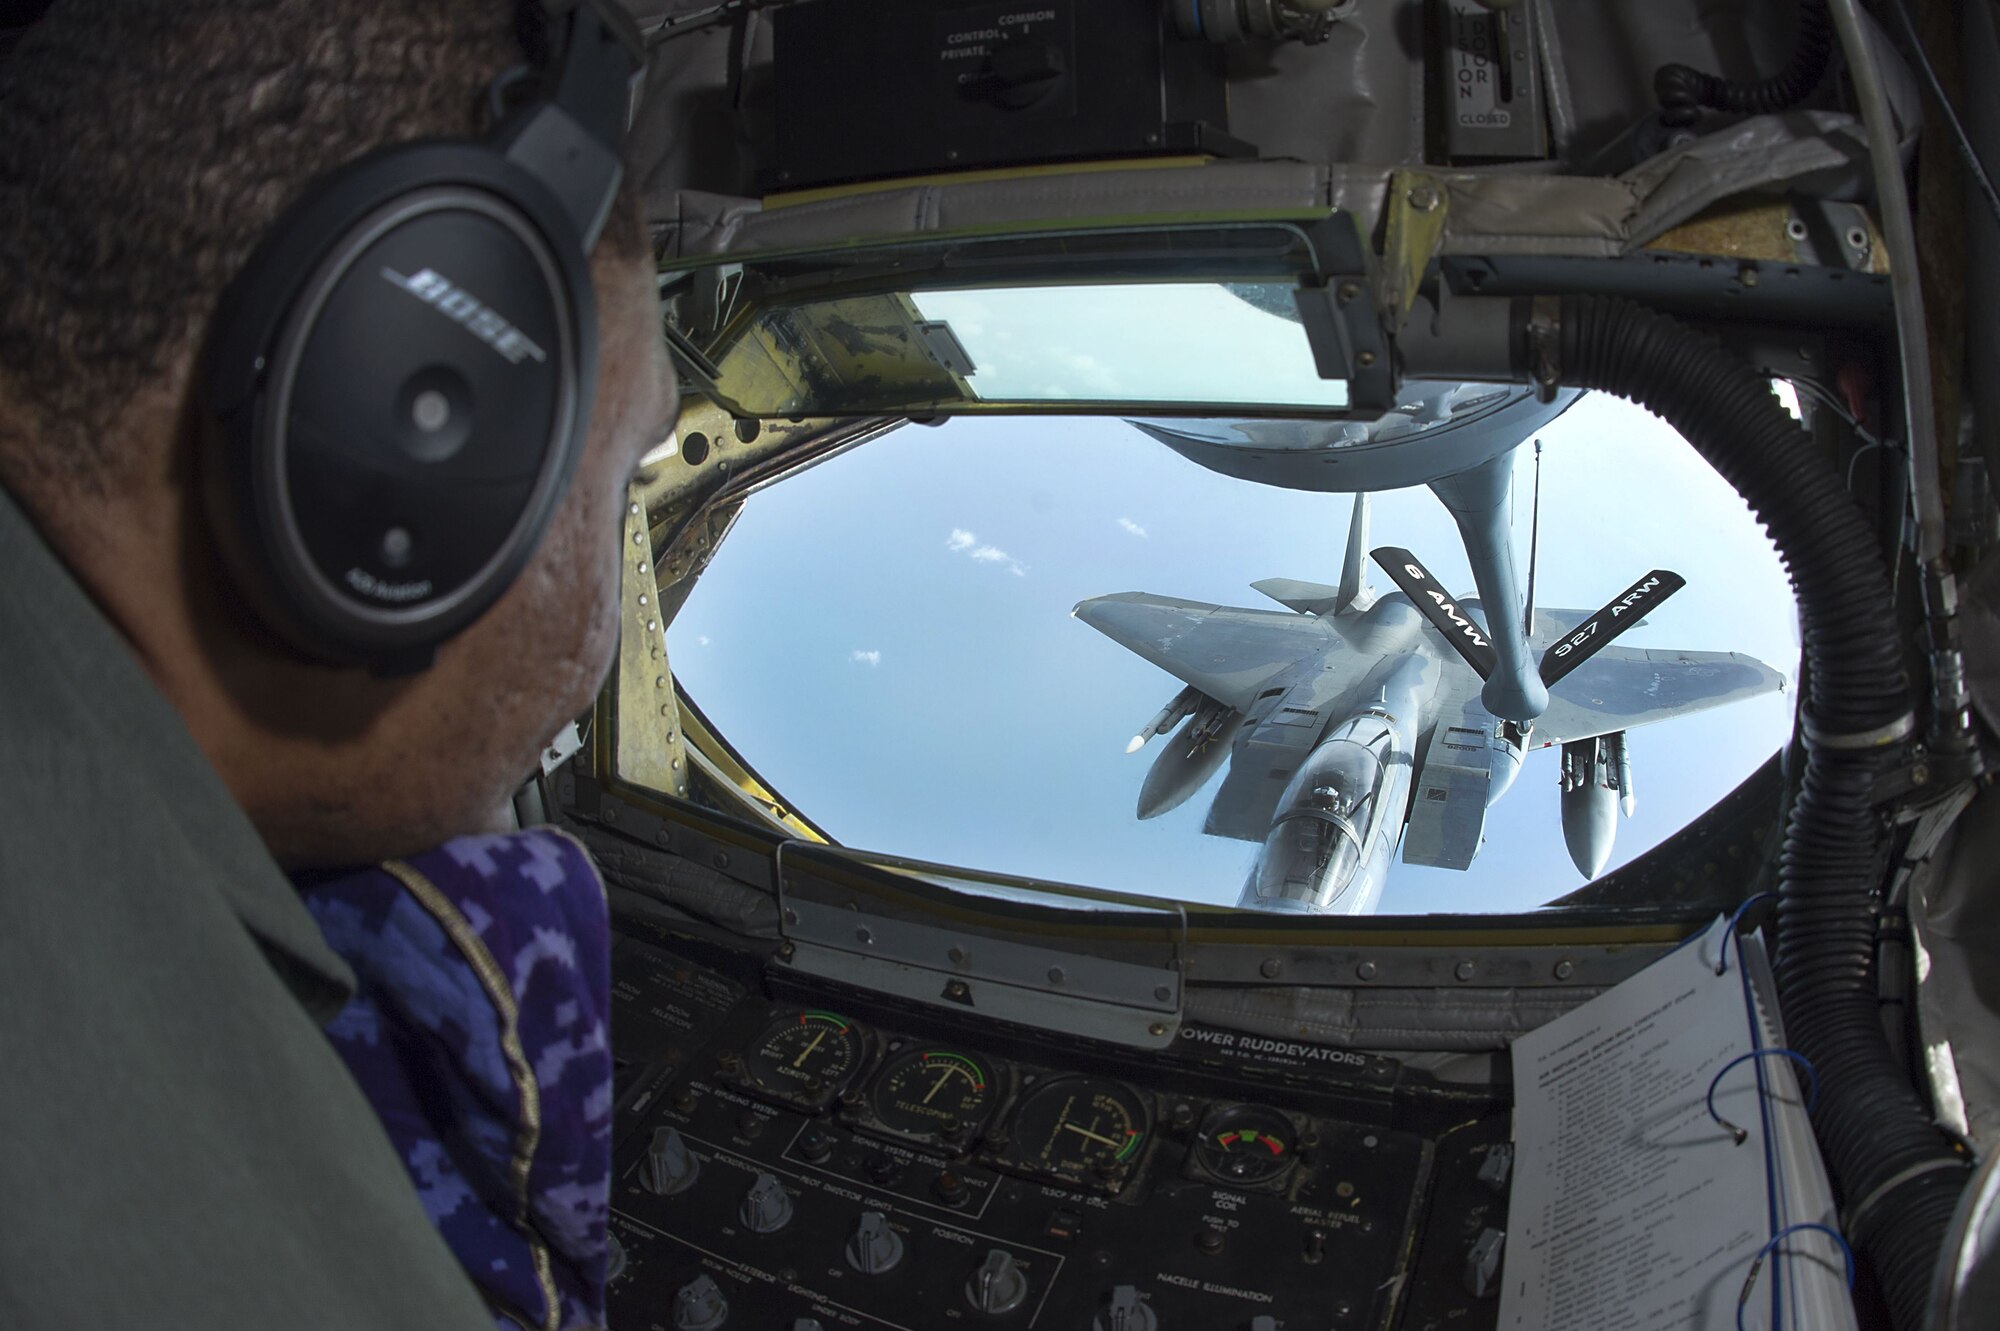 U.S. Air Force Staff Sgt. Jamar Campbell, a boom operator assigned to the 50th Air Refueling Squadron (ARS) prepares to make contact with an F-15 Eagle aircraft during the first 50th ARS training mission at MacDill Air Force Base, Fla., Jan. 16, 2018. As the 50th ARS settles in, their goal is to have one flight per day. (U.S. Air Force photo by Airman 1st Class Caleb Nunez)